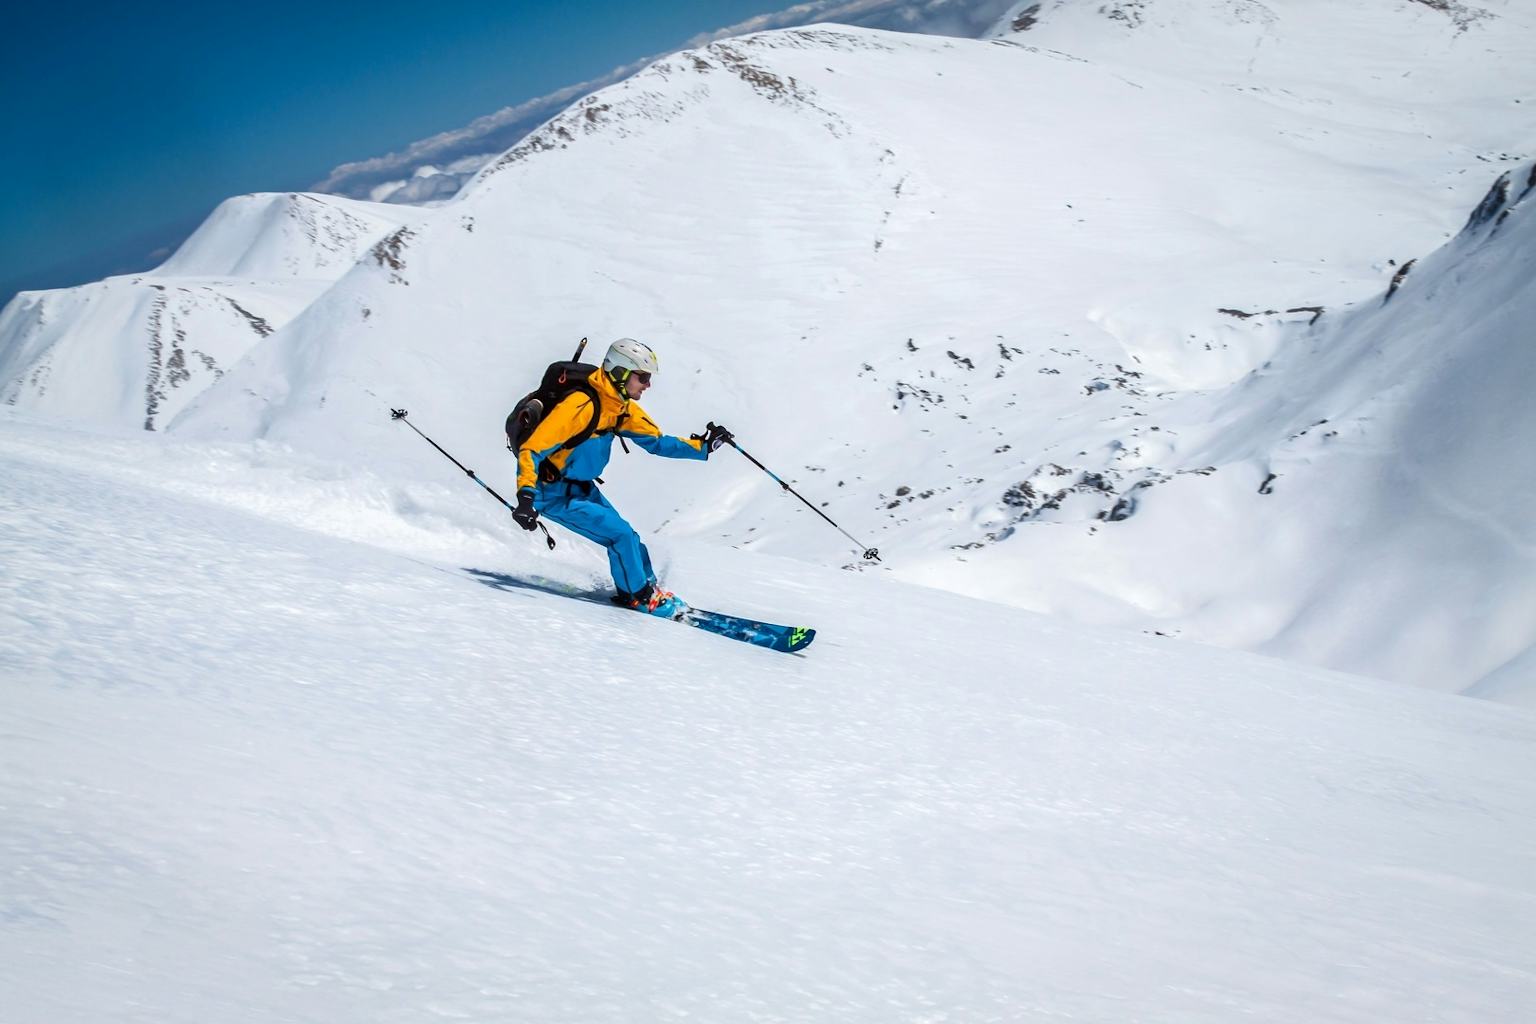 Pierra Creta: welcome to the southernmost ski mountaineering race in Europe!